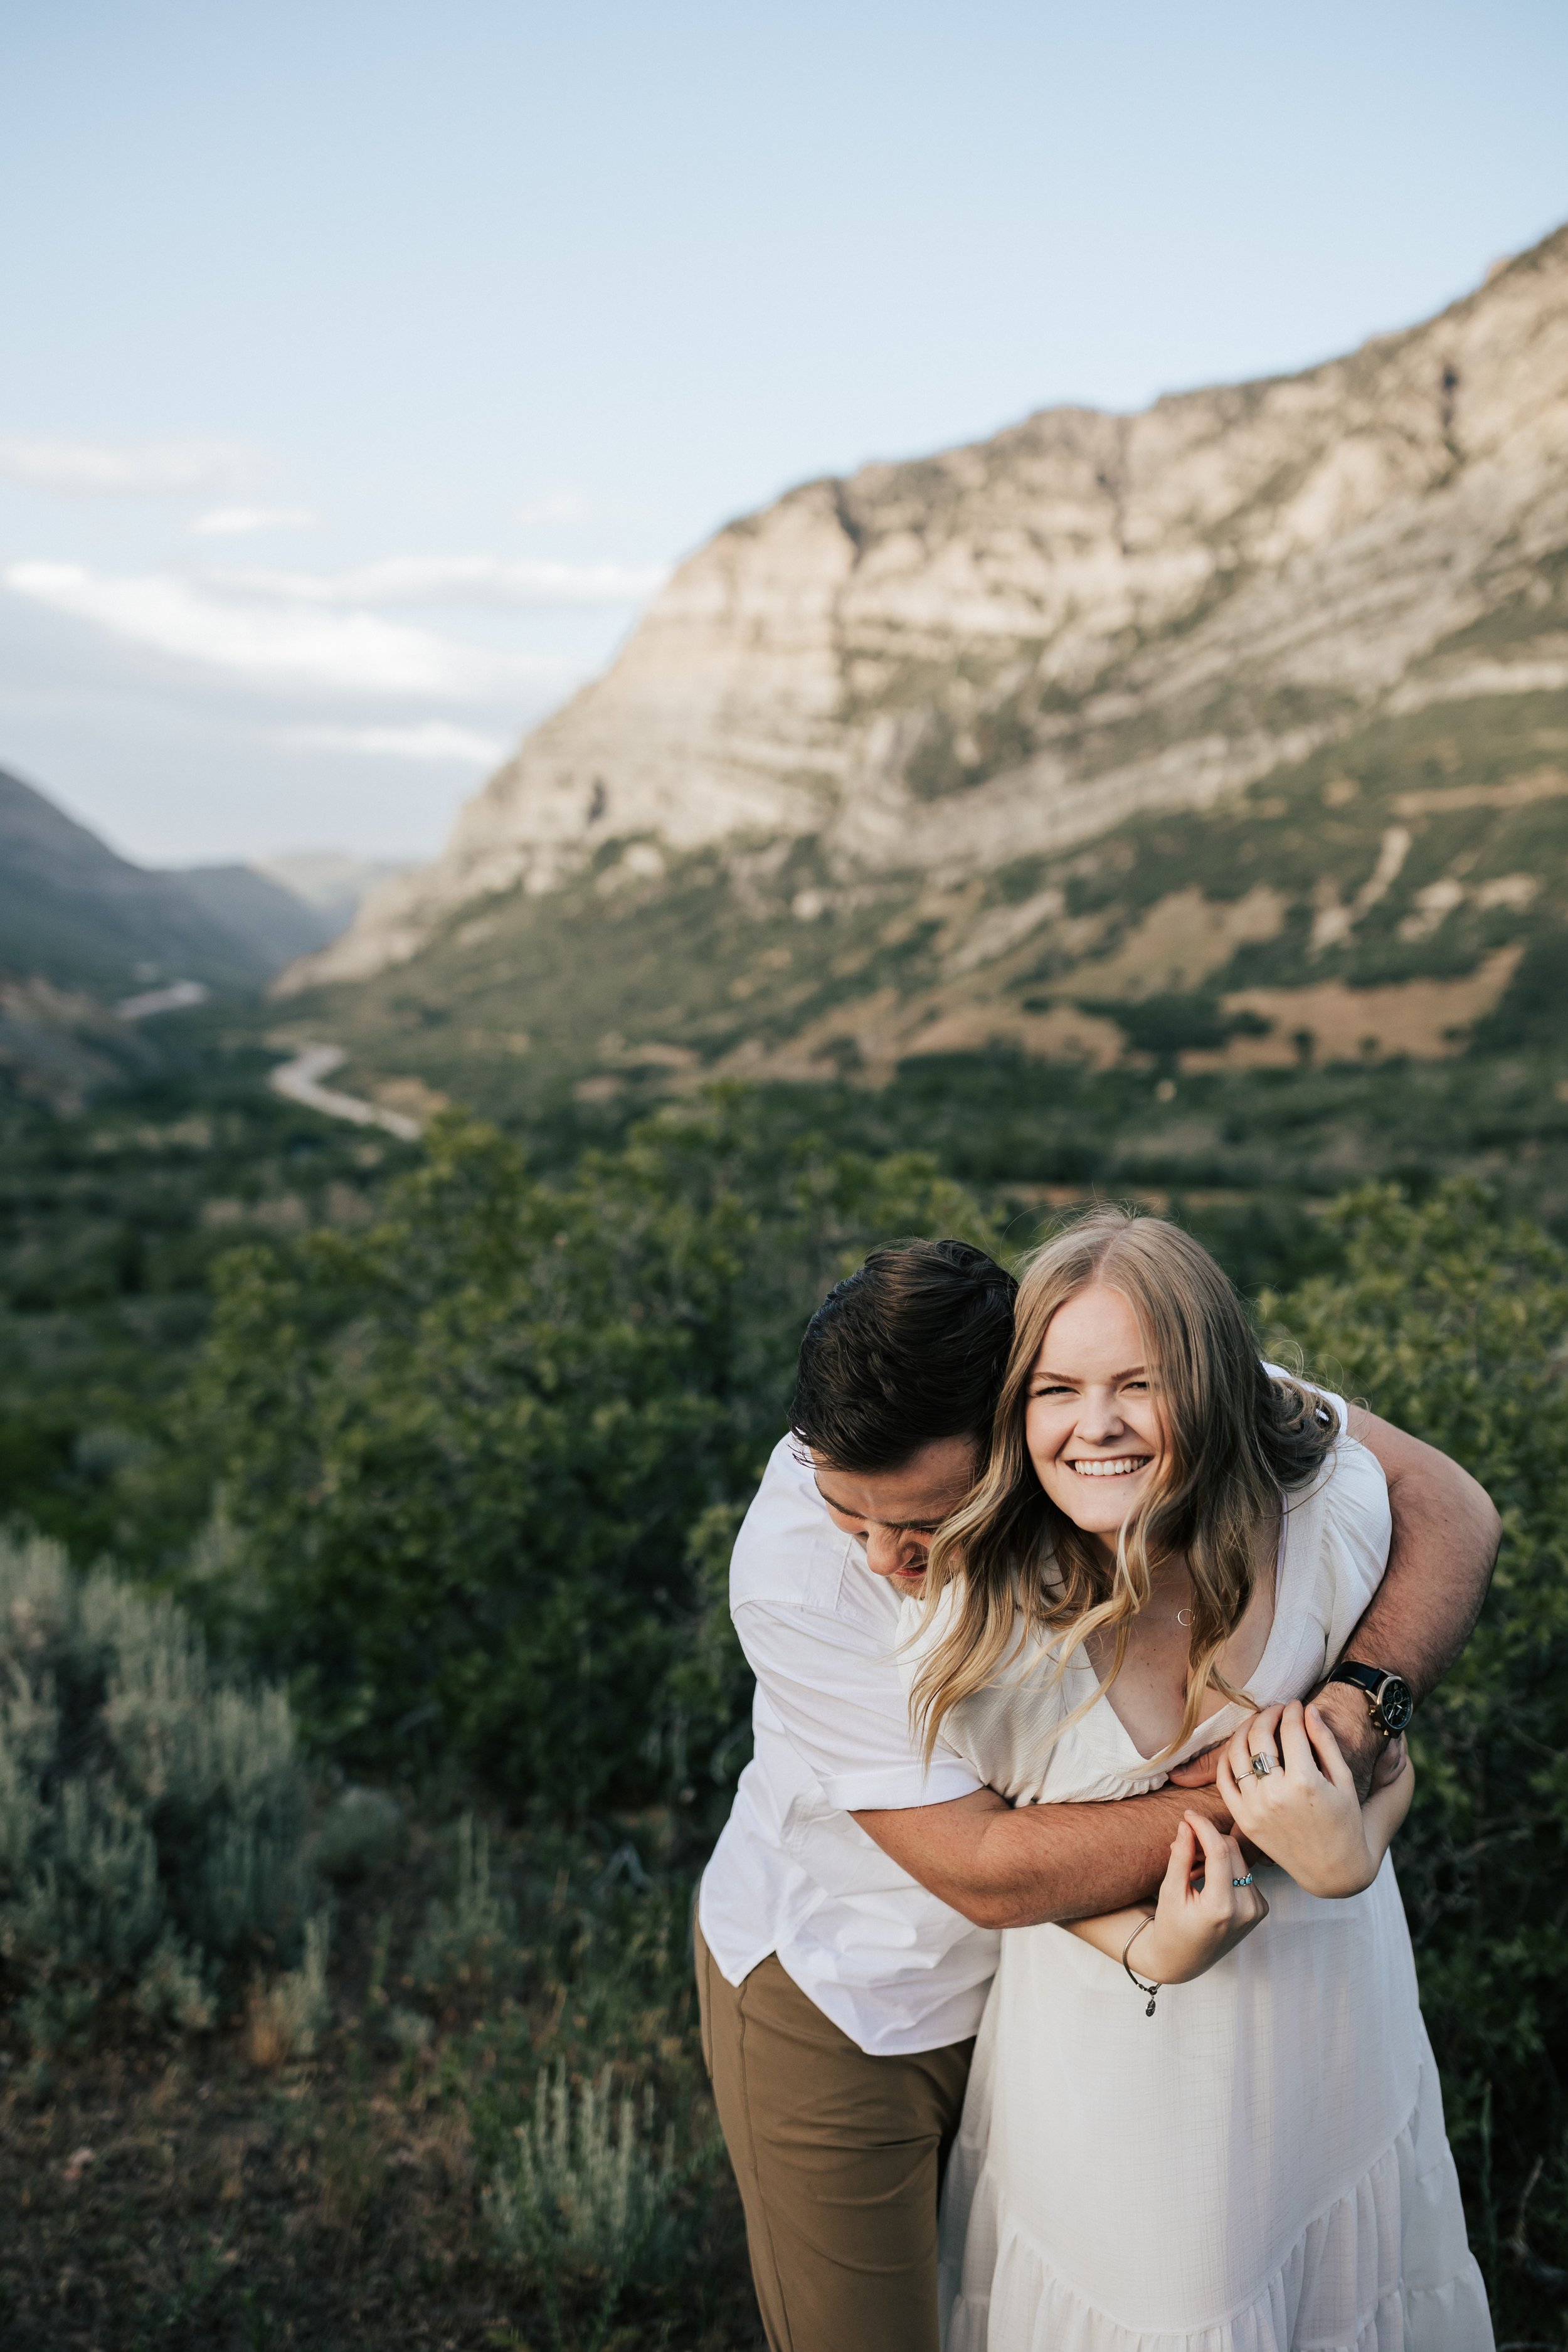  Summer anniversary couples session in the mountains. A young couple tickles each other in the mountains. Utah photographer. Engagement session. #utahphotographer #utahengagements  